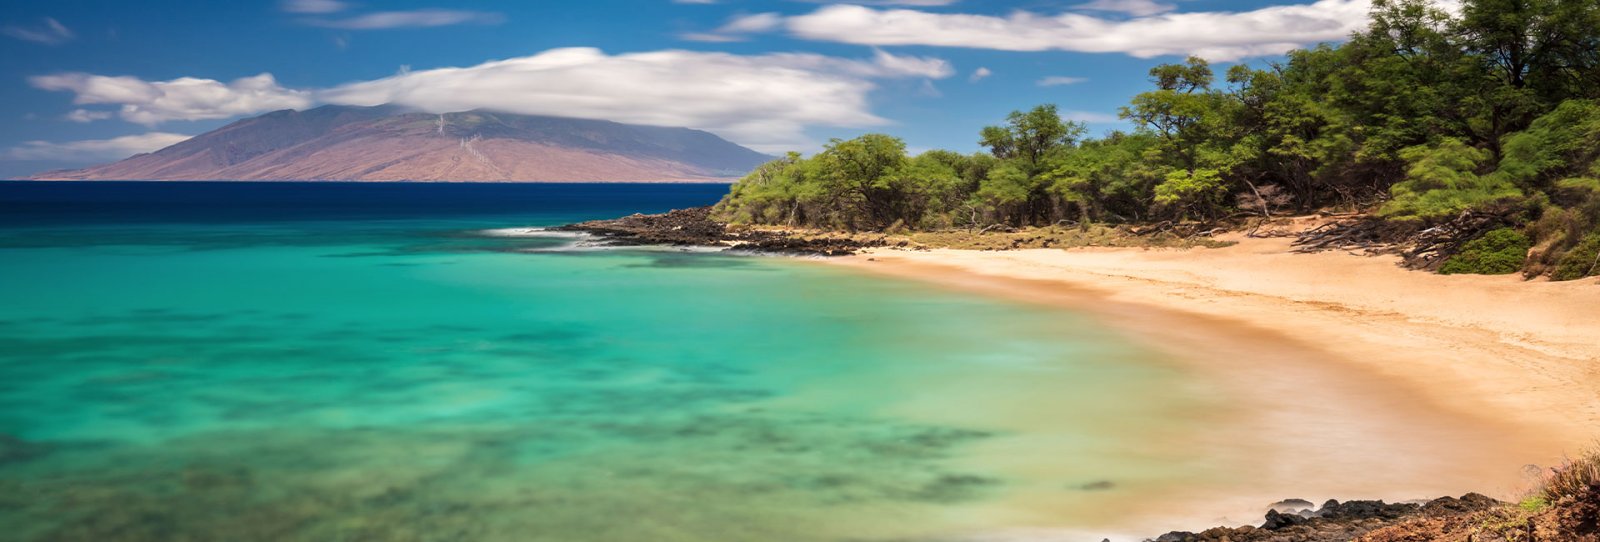 aymen victor recommends little beach maui women pic